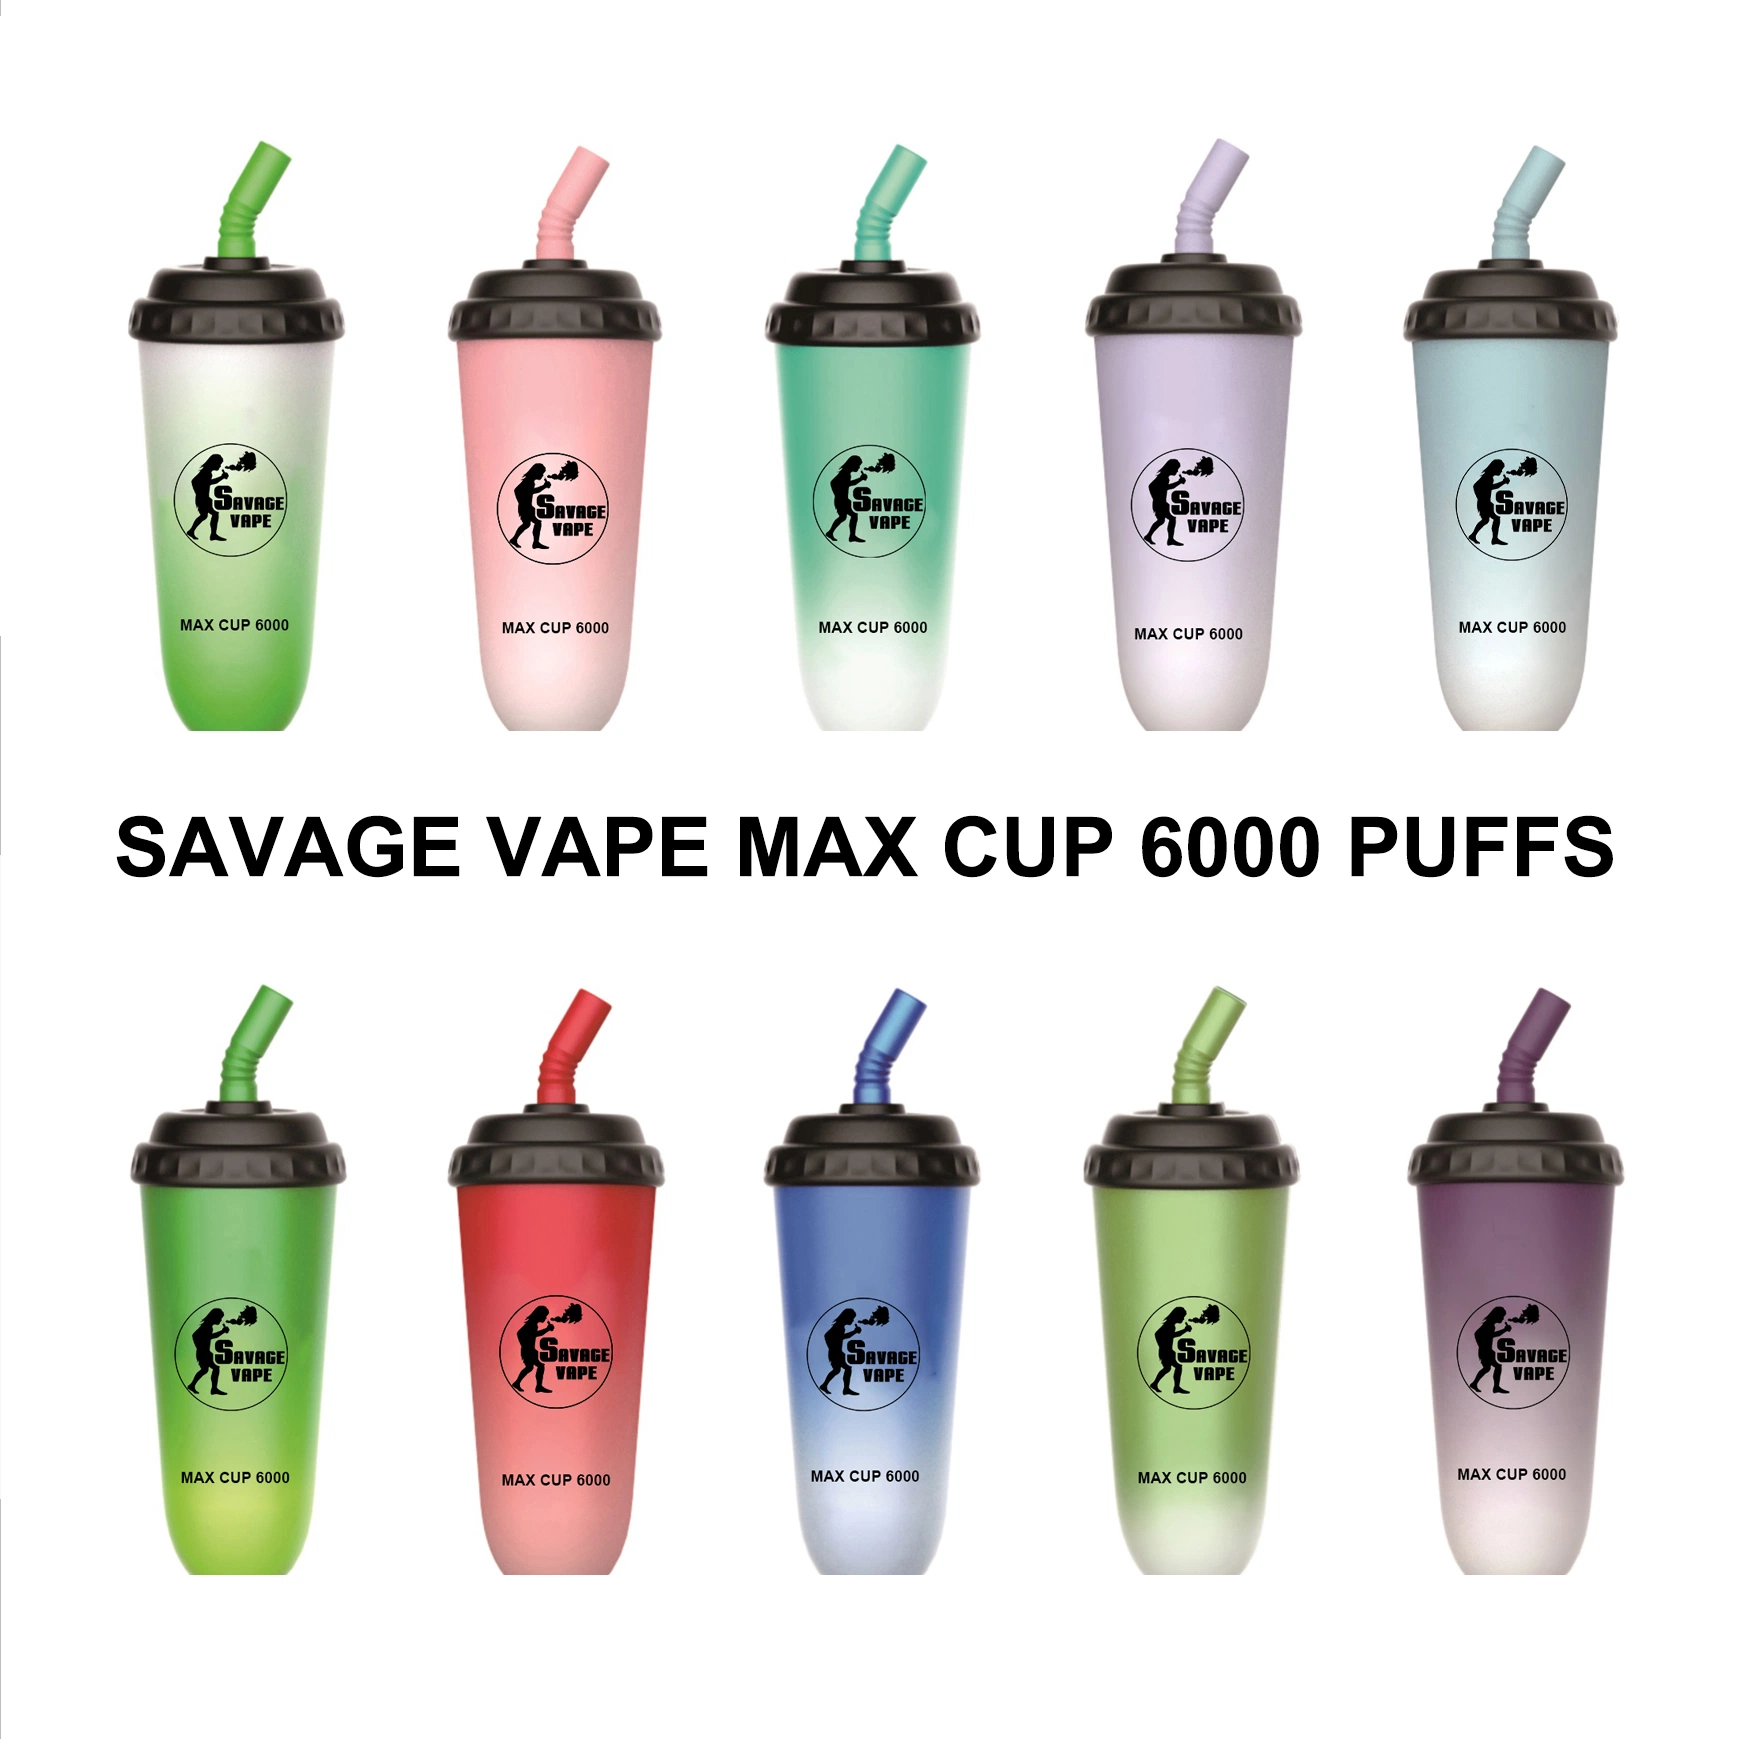 Original Savage Max Cup 6000 7000 Puffs Electronic Cigarette Disposable/Chargeable Vape Randm Tornado